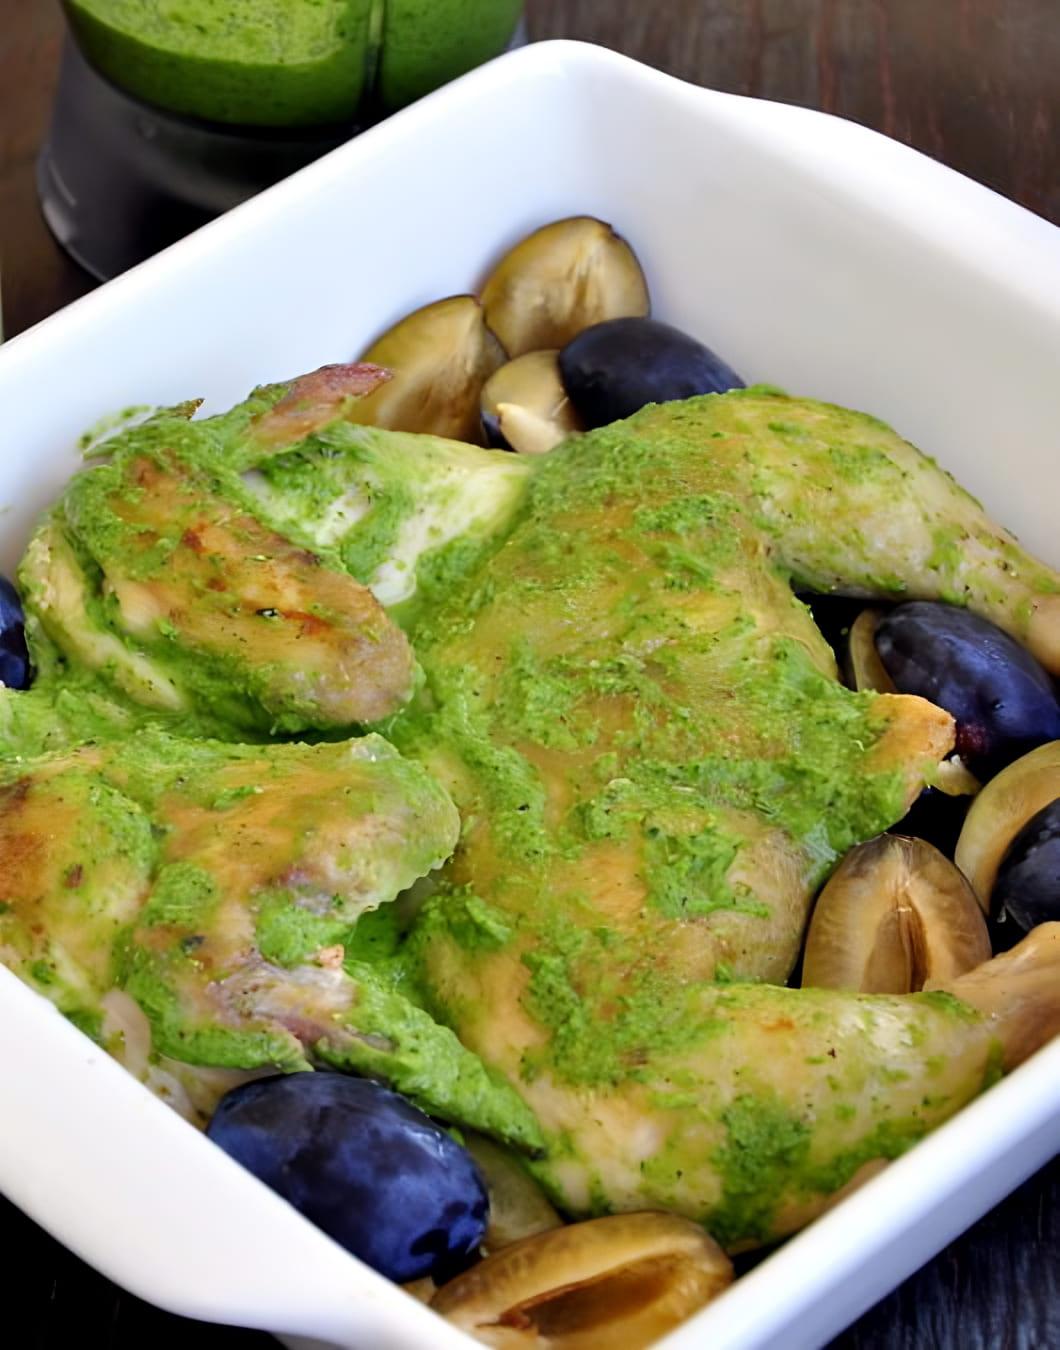 Chicken baked in aromatic green sauce with plums